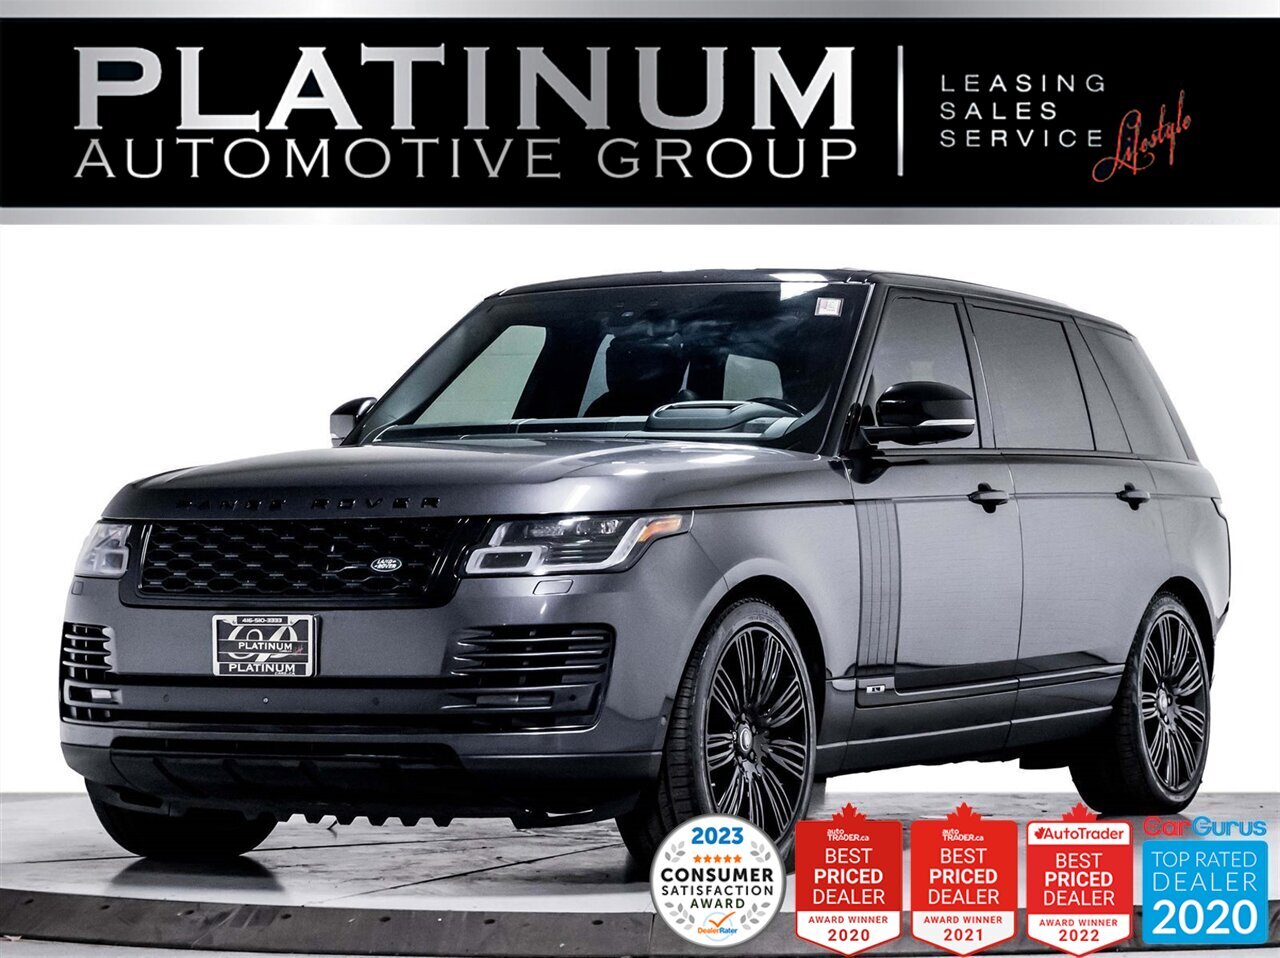 2019 Land Rover Range Rover SUPERCHARGED LWB, 518HP, ACTIVE SUSPENSION